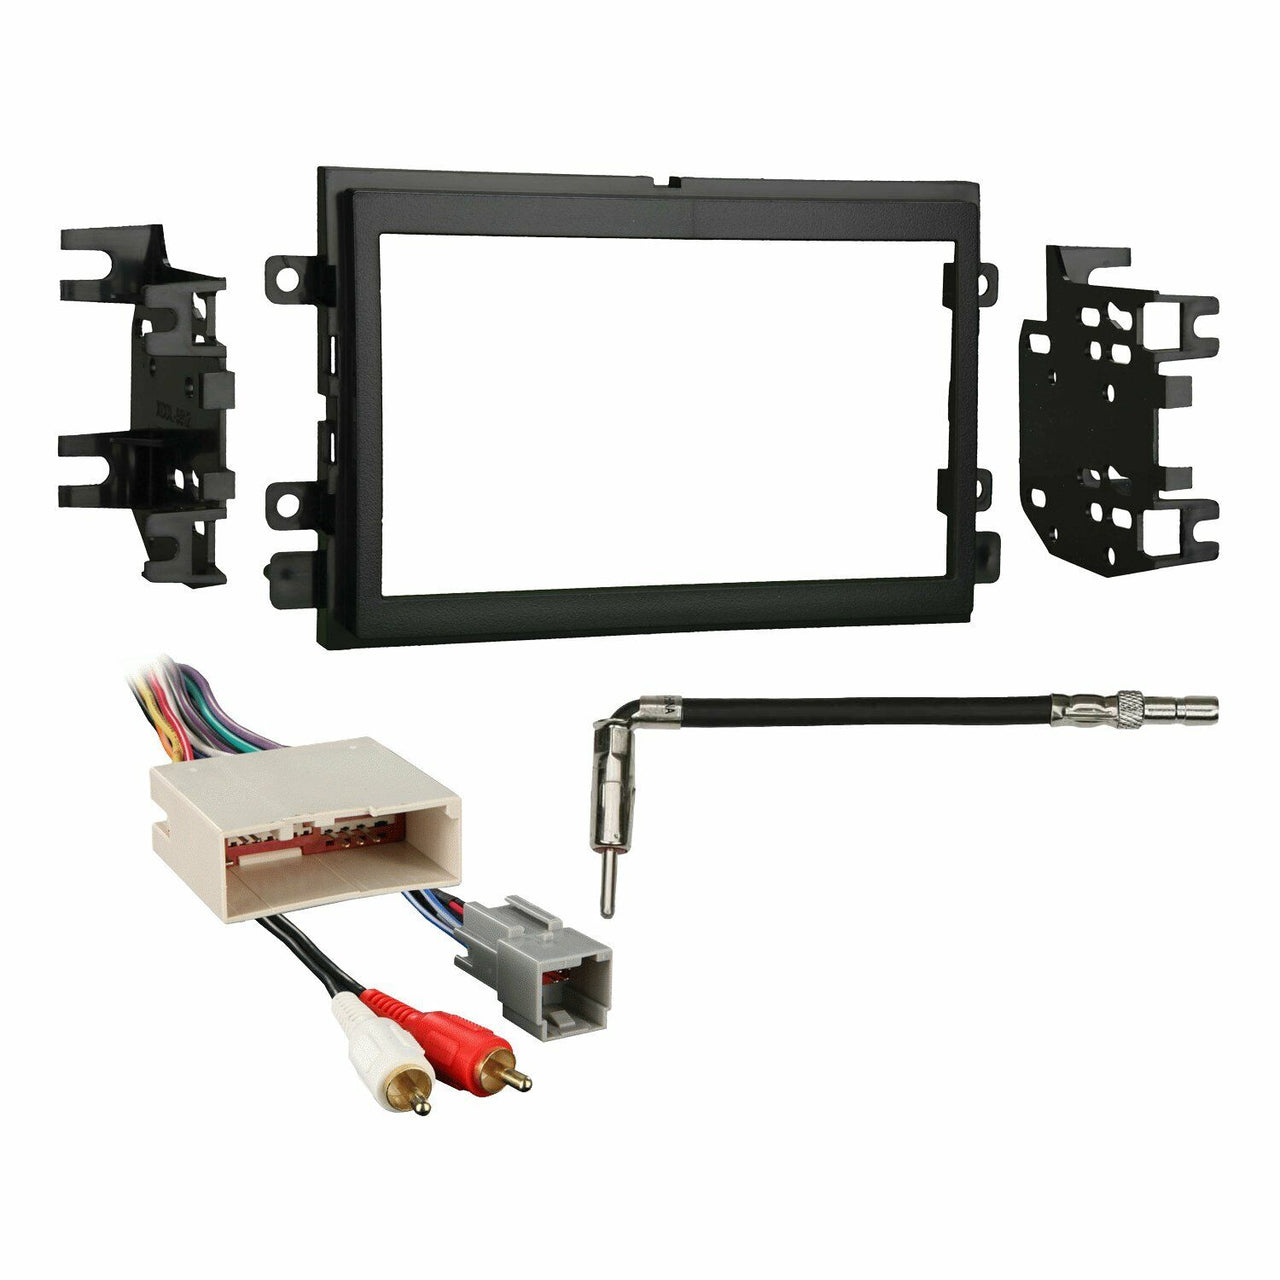 Double DIN Radio Dash Stereo Dash Kit compatible with 04-15 Ford F-150 With Wire Harness